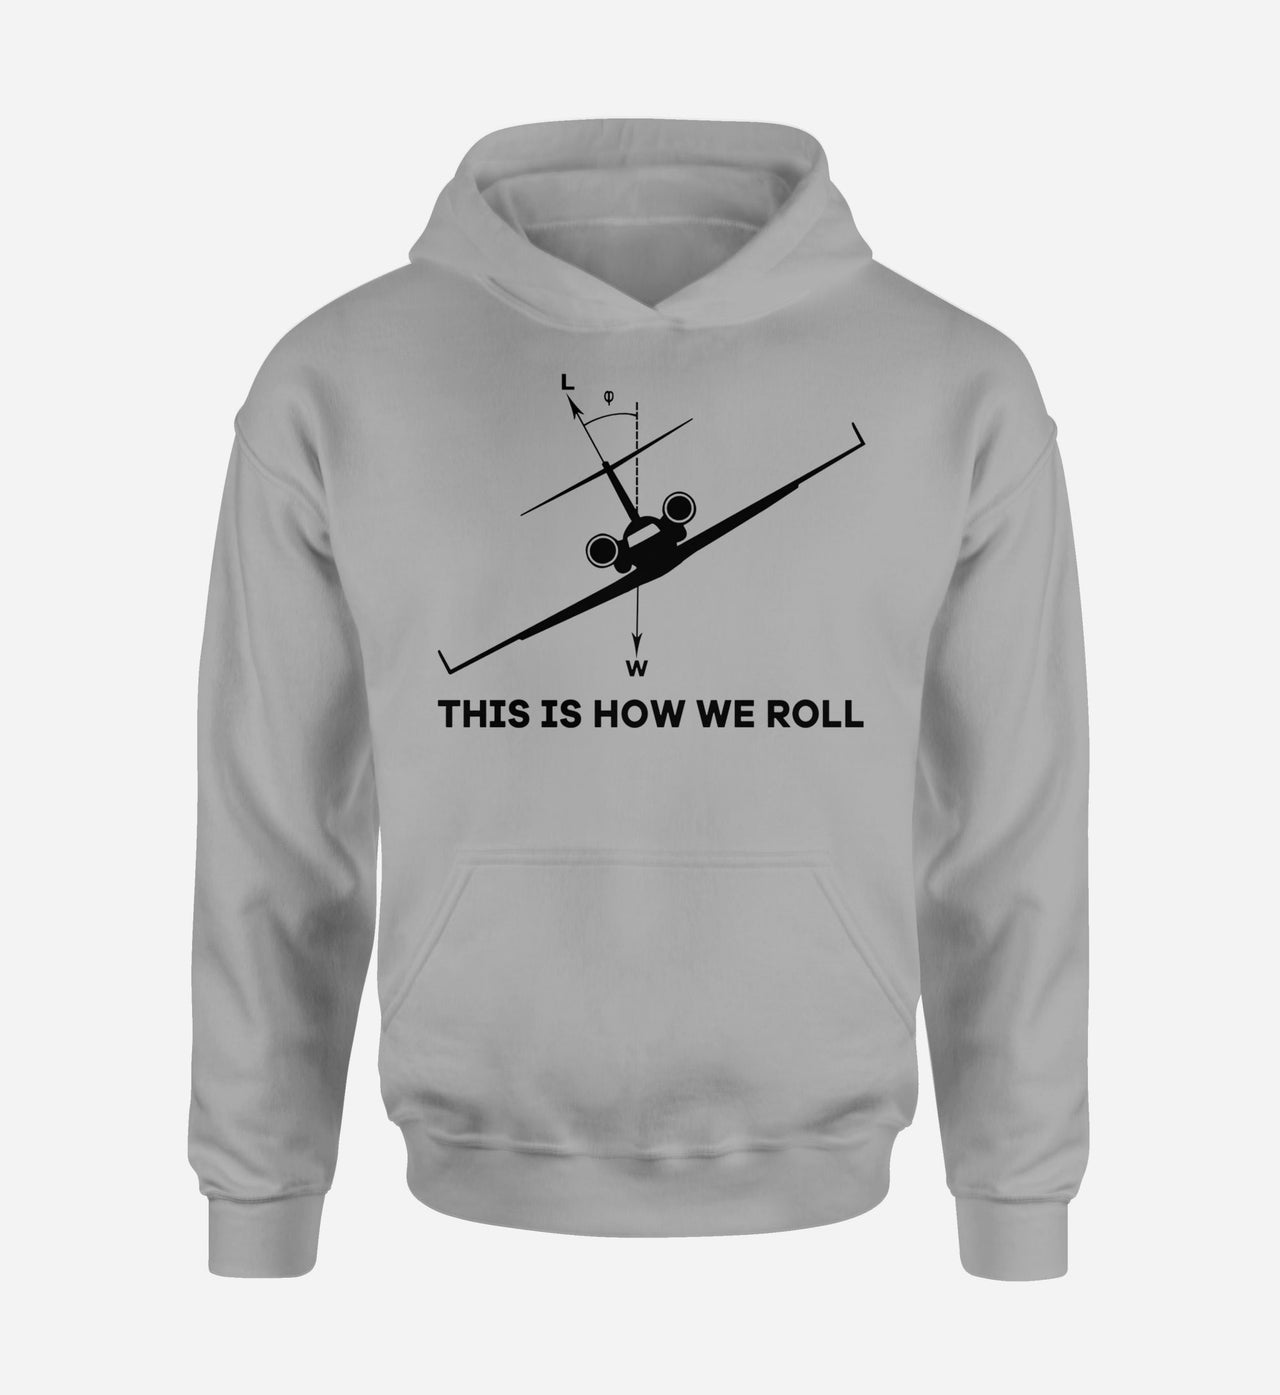 This is How We Roll Designed Hoodies